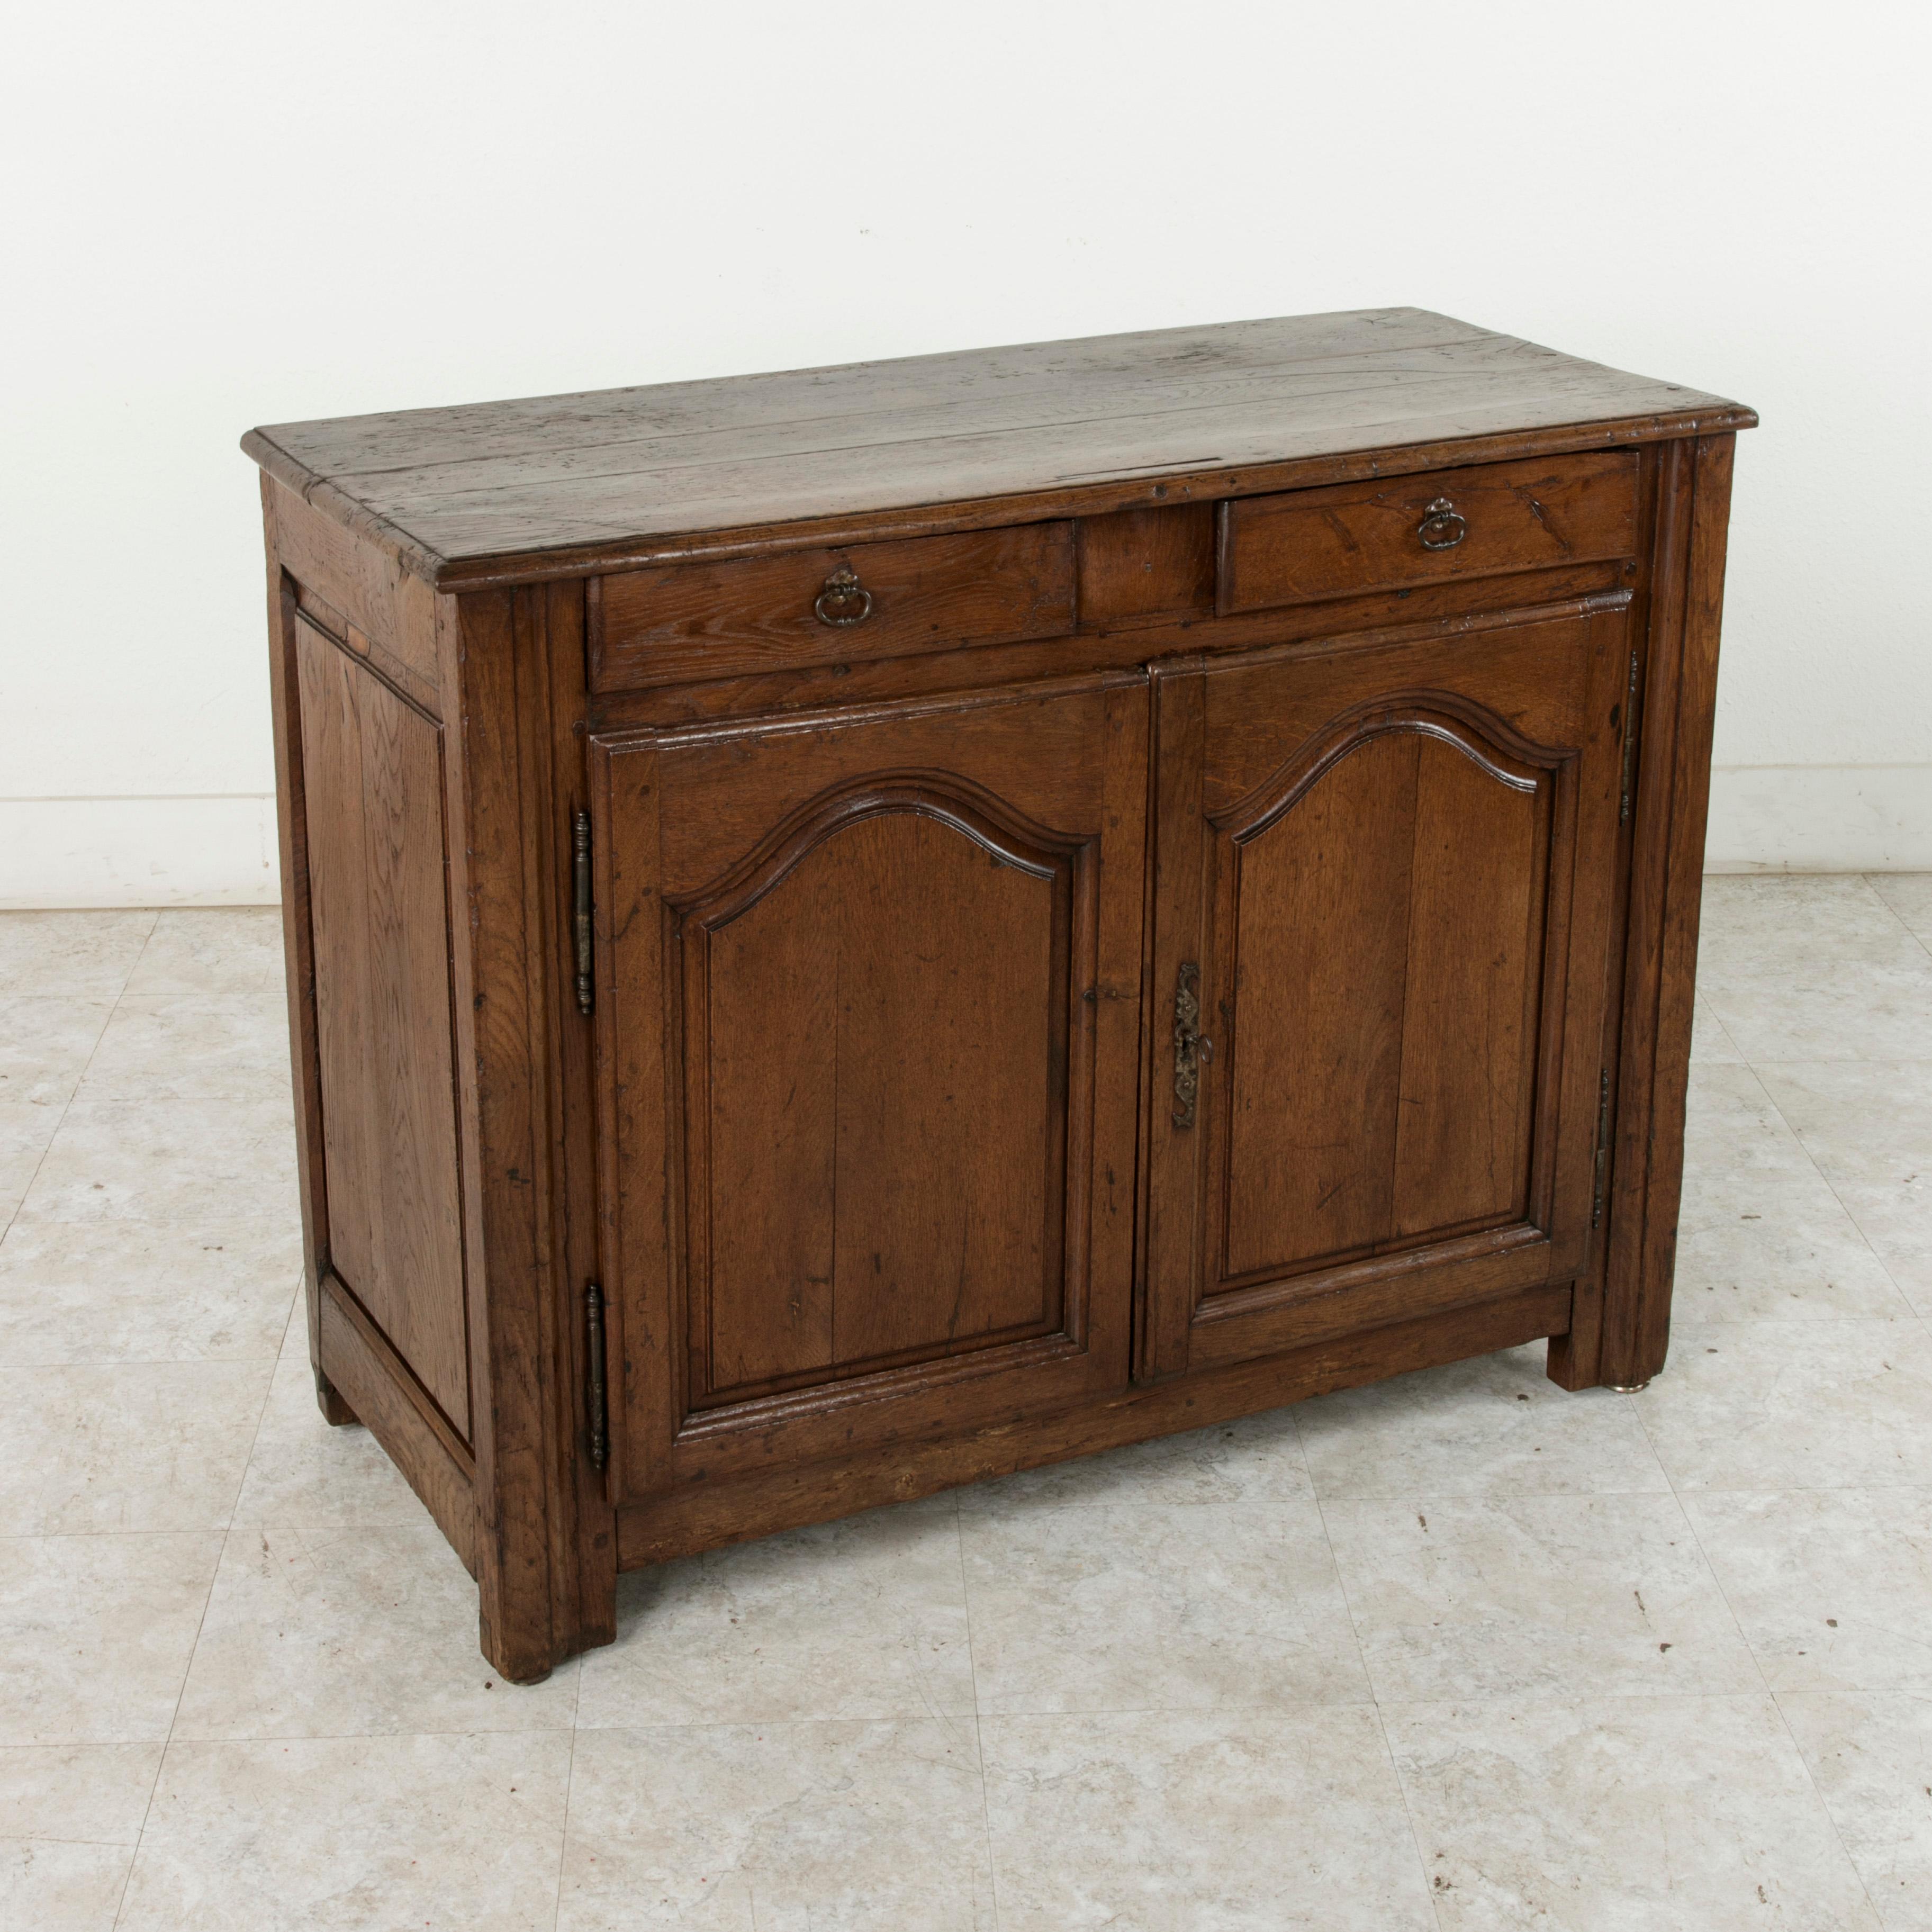 This mid-19th century French Louis XIV style artisan-made oak buffet or sideboard from the region of Normandy, France, features paneled sides of hand pegged mortise and tenon construction. The beveled top rests above two drawers fitted with iron